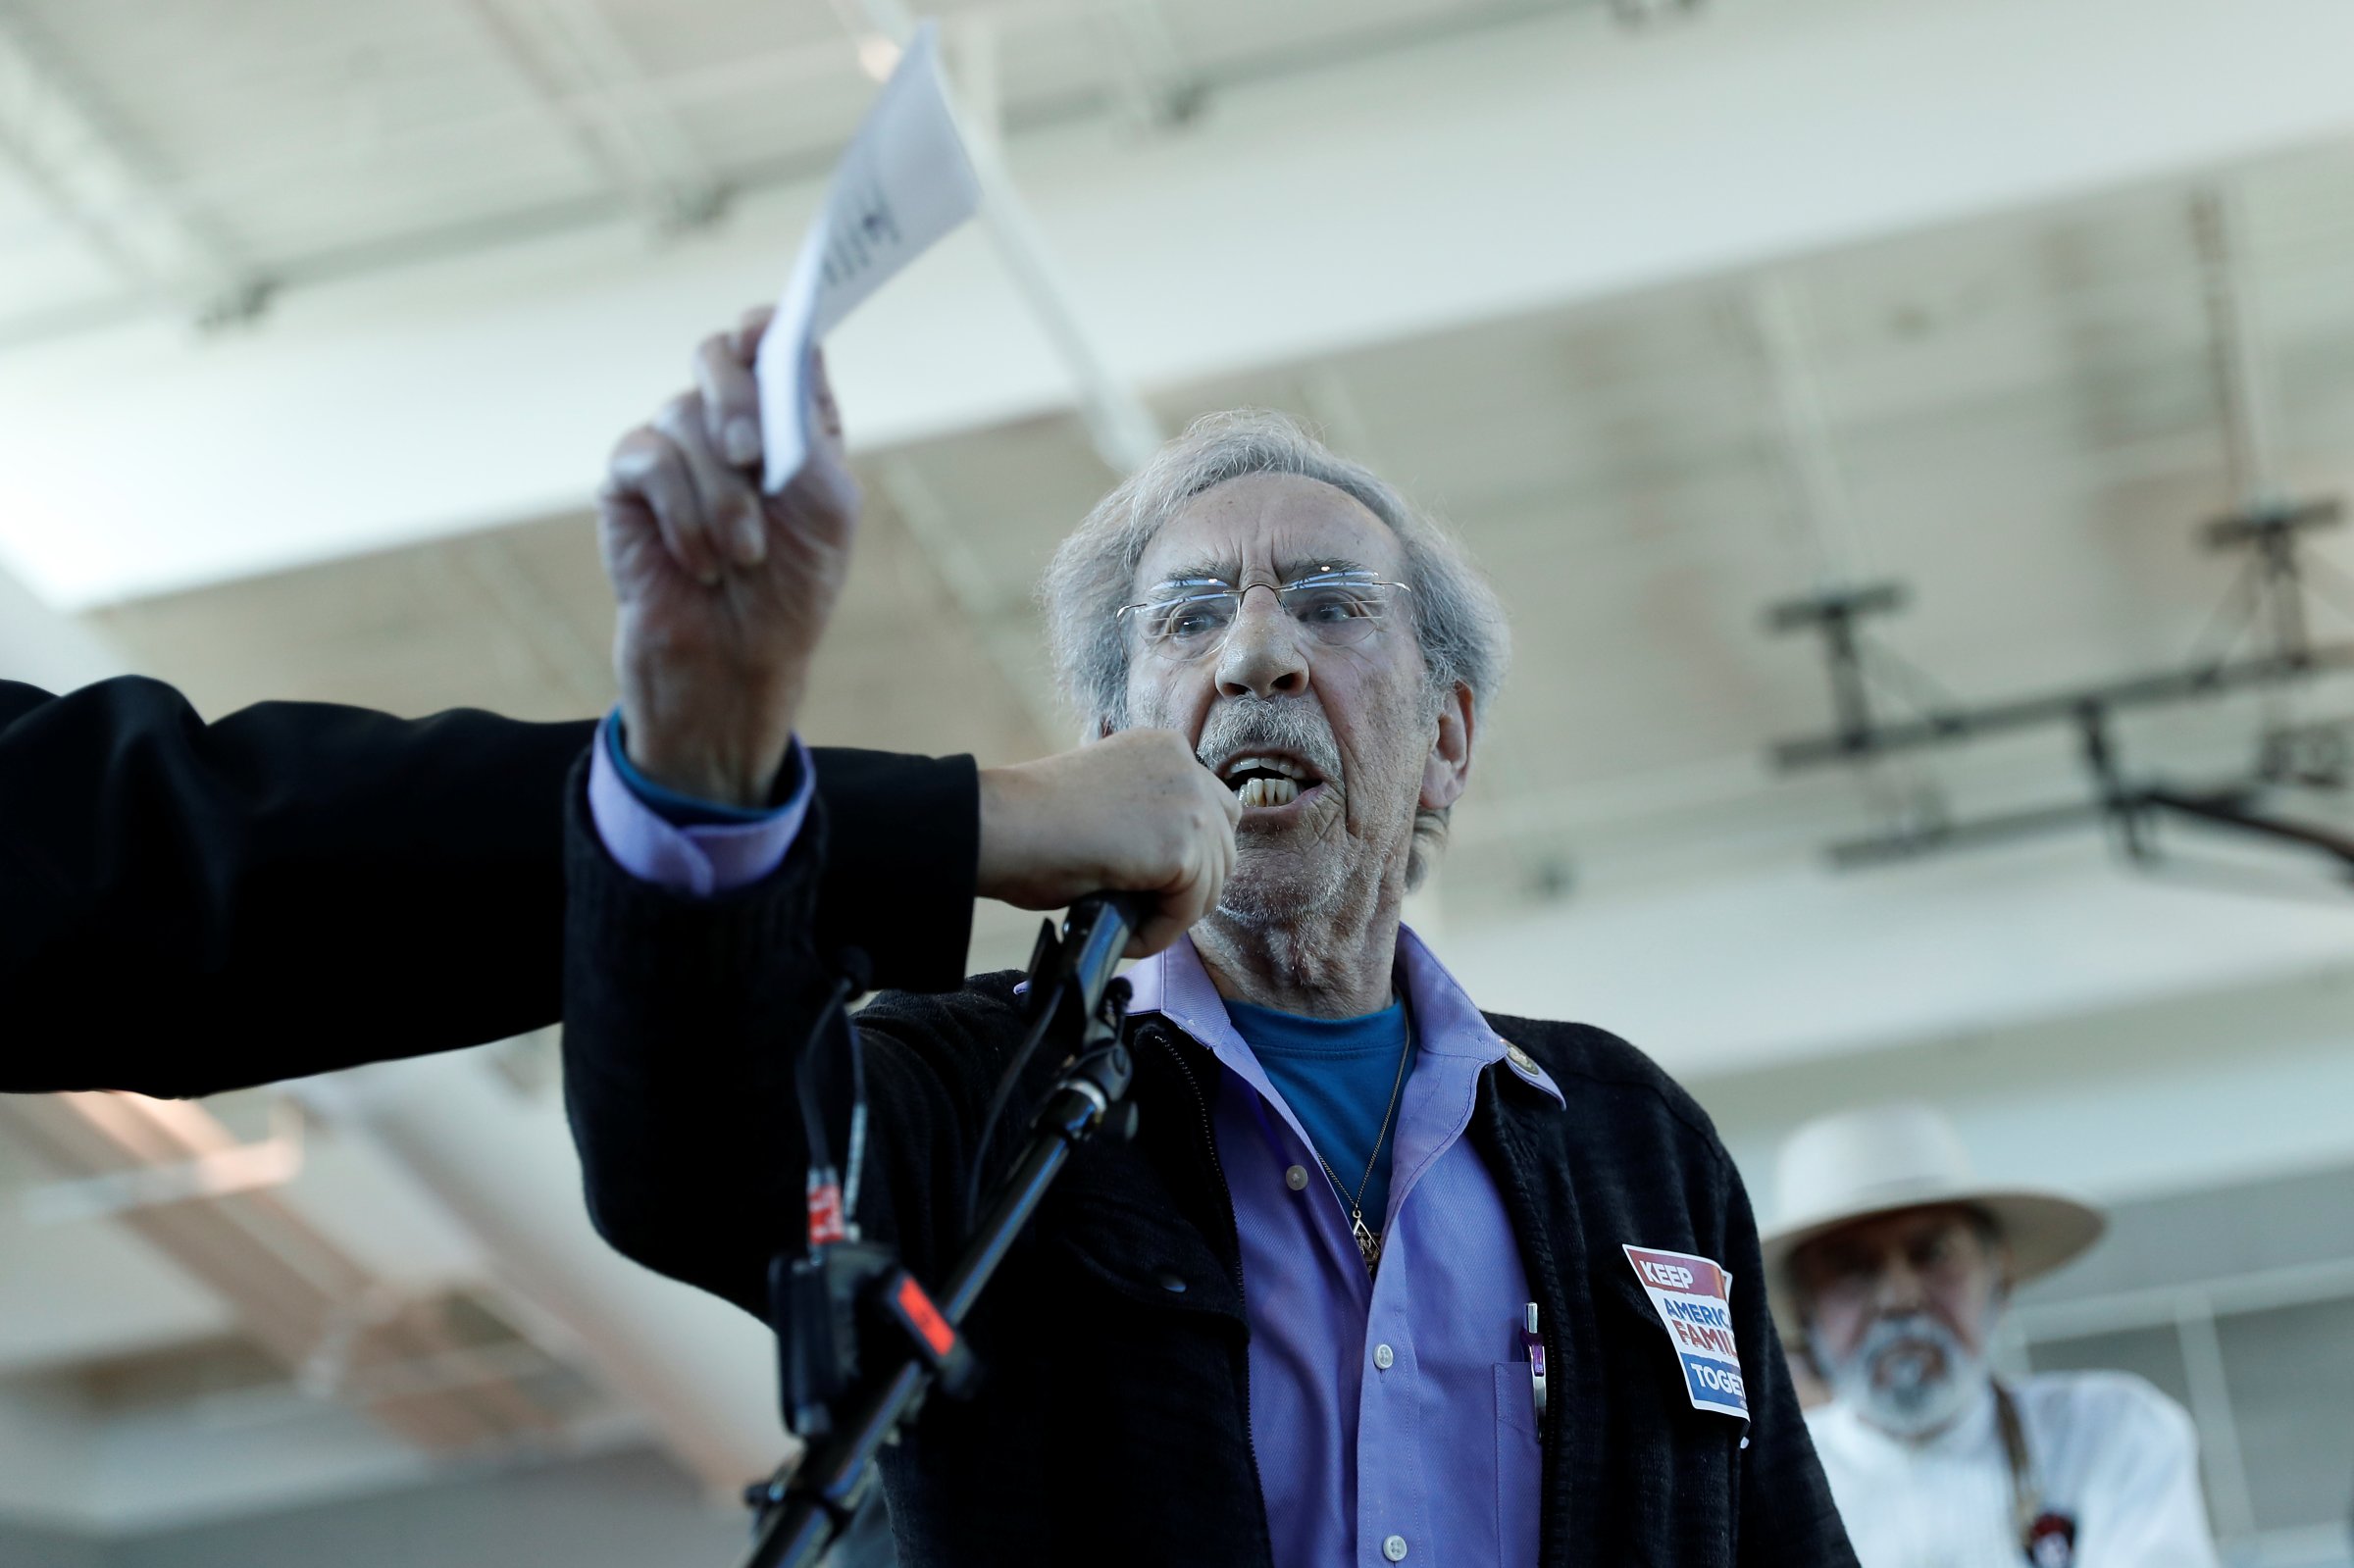 Bernard Marks, who survived the Nazi holocaust at the Auschwitz concentration camp, speaks during a town hall meeting with Thomas Homan, acting director of U.S. Immigration and Customs Enforcement (ICE), in Sacramento